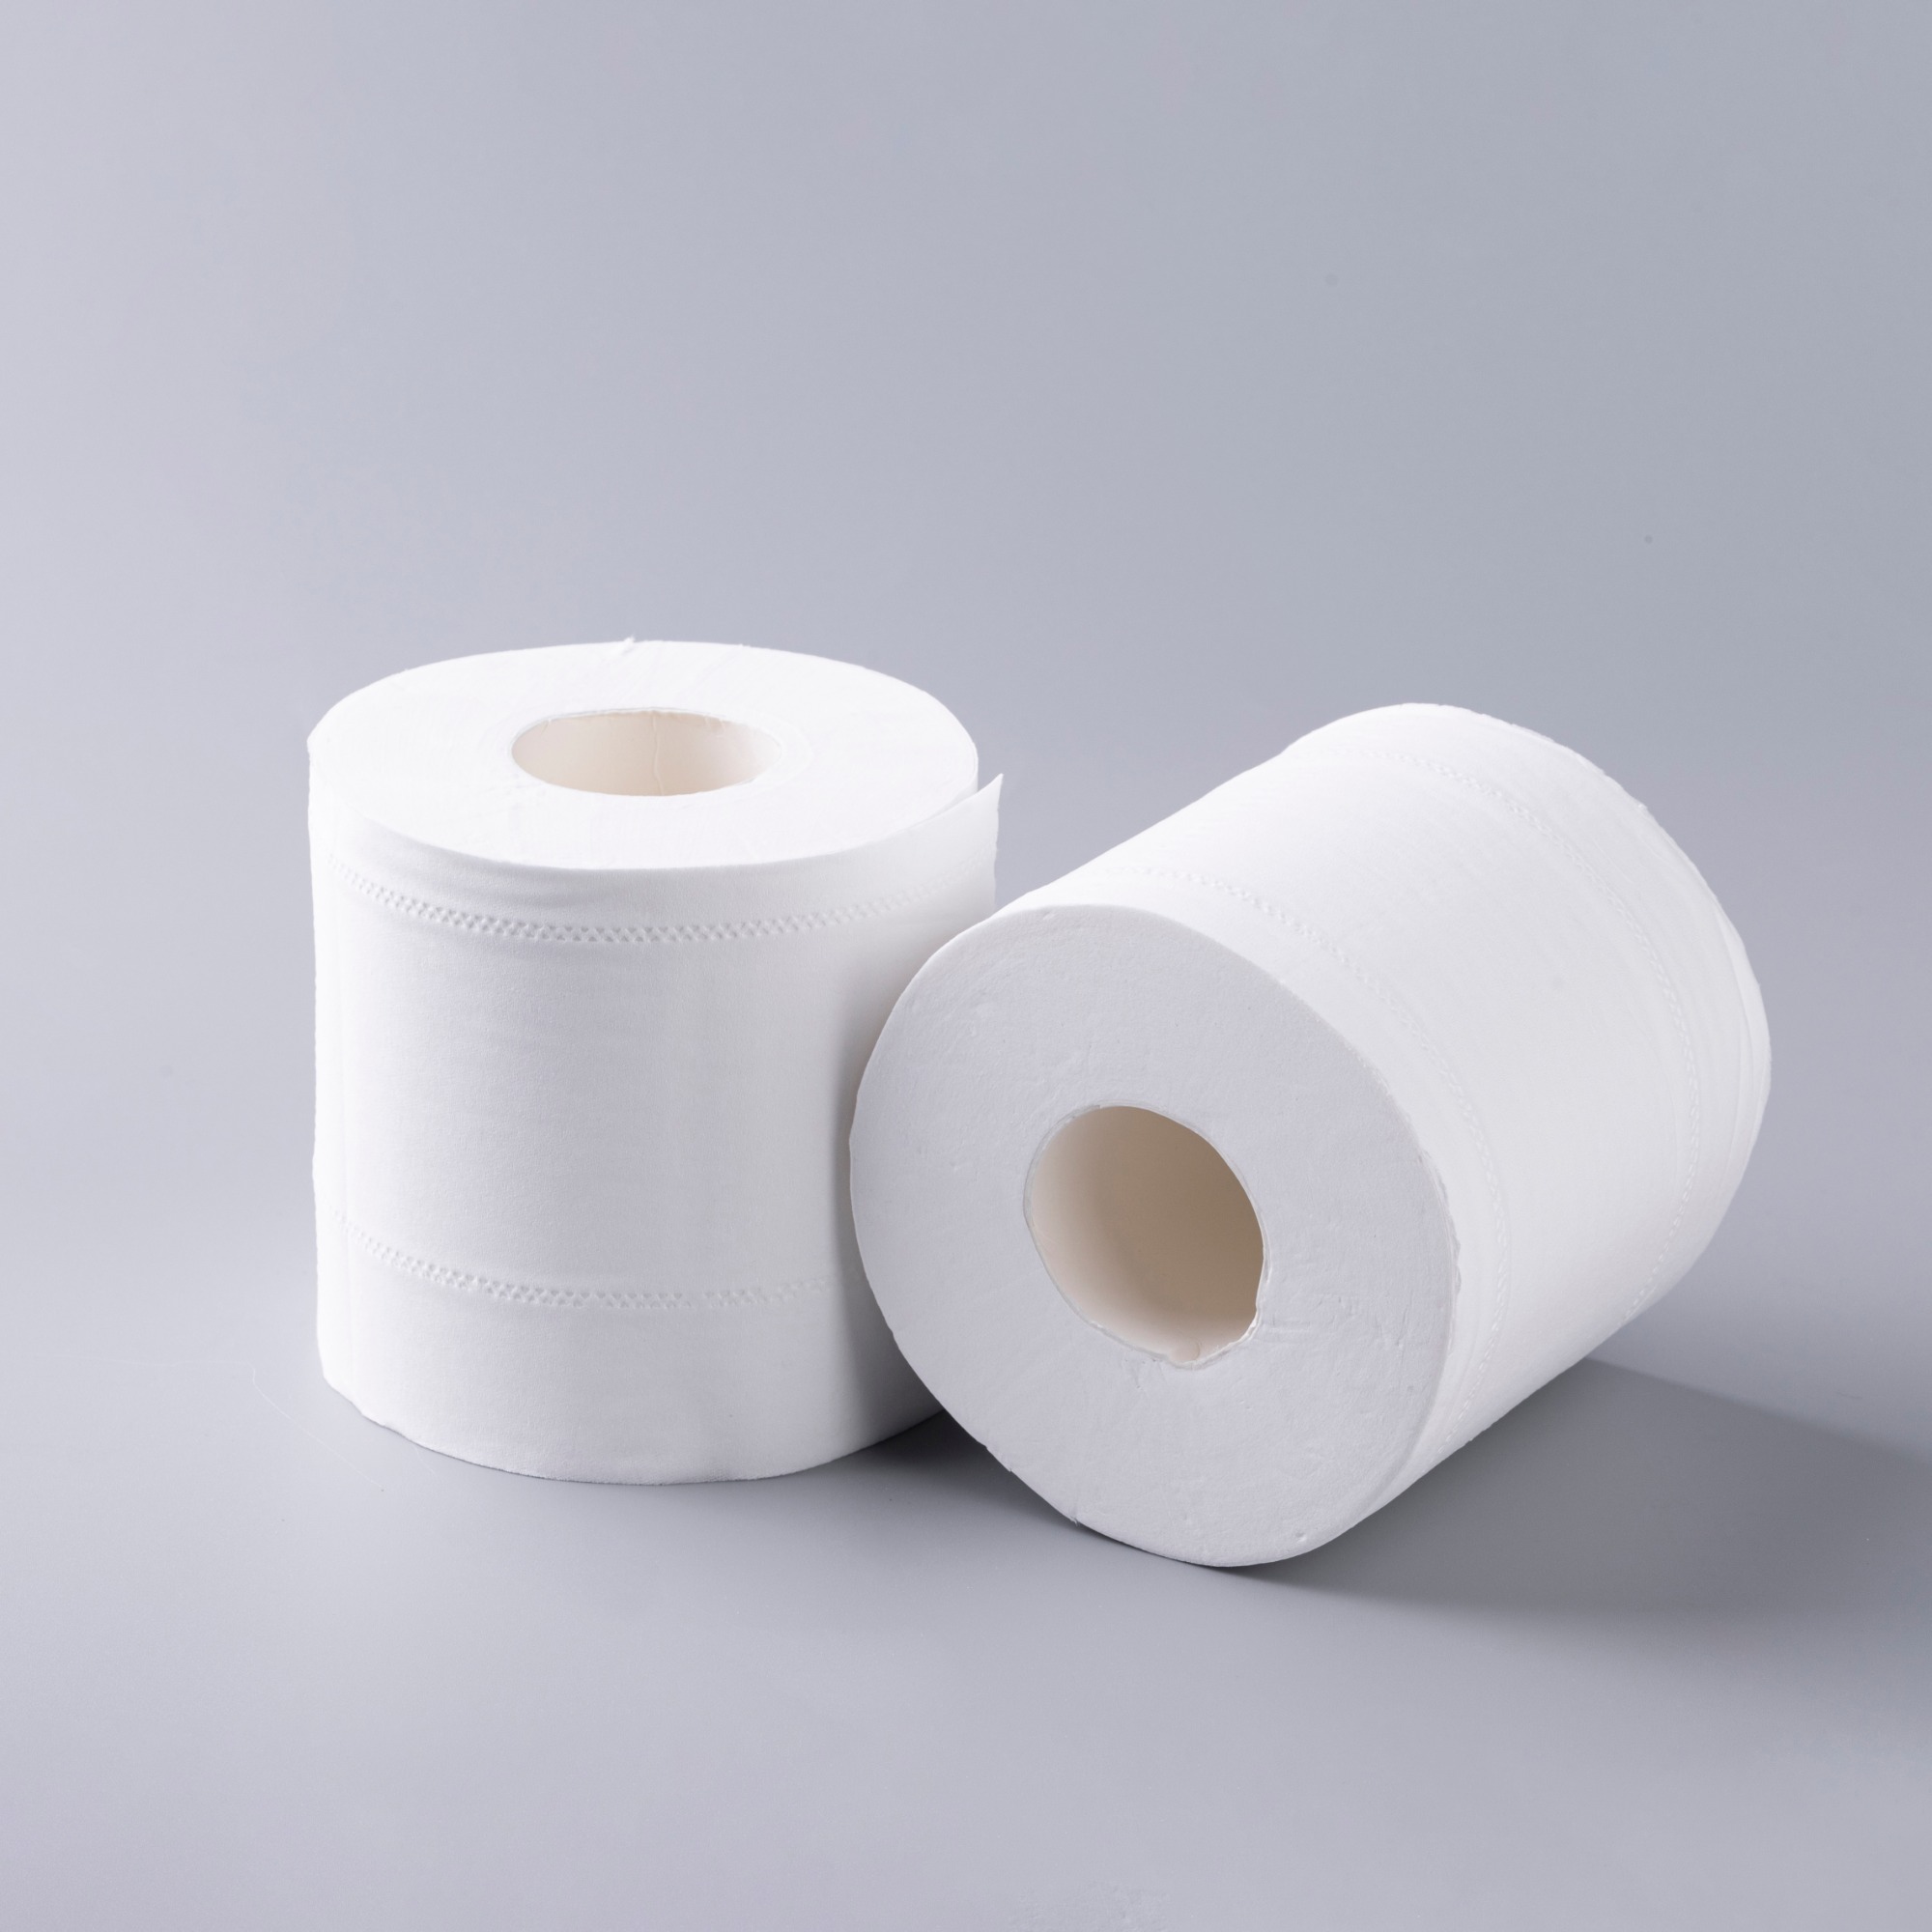 Choosing Toilet Paper A Comparative Analysis Of Wood Pulp Bamboo Pulp And Recycled Paper